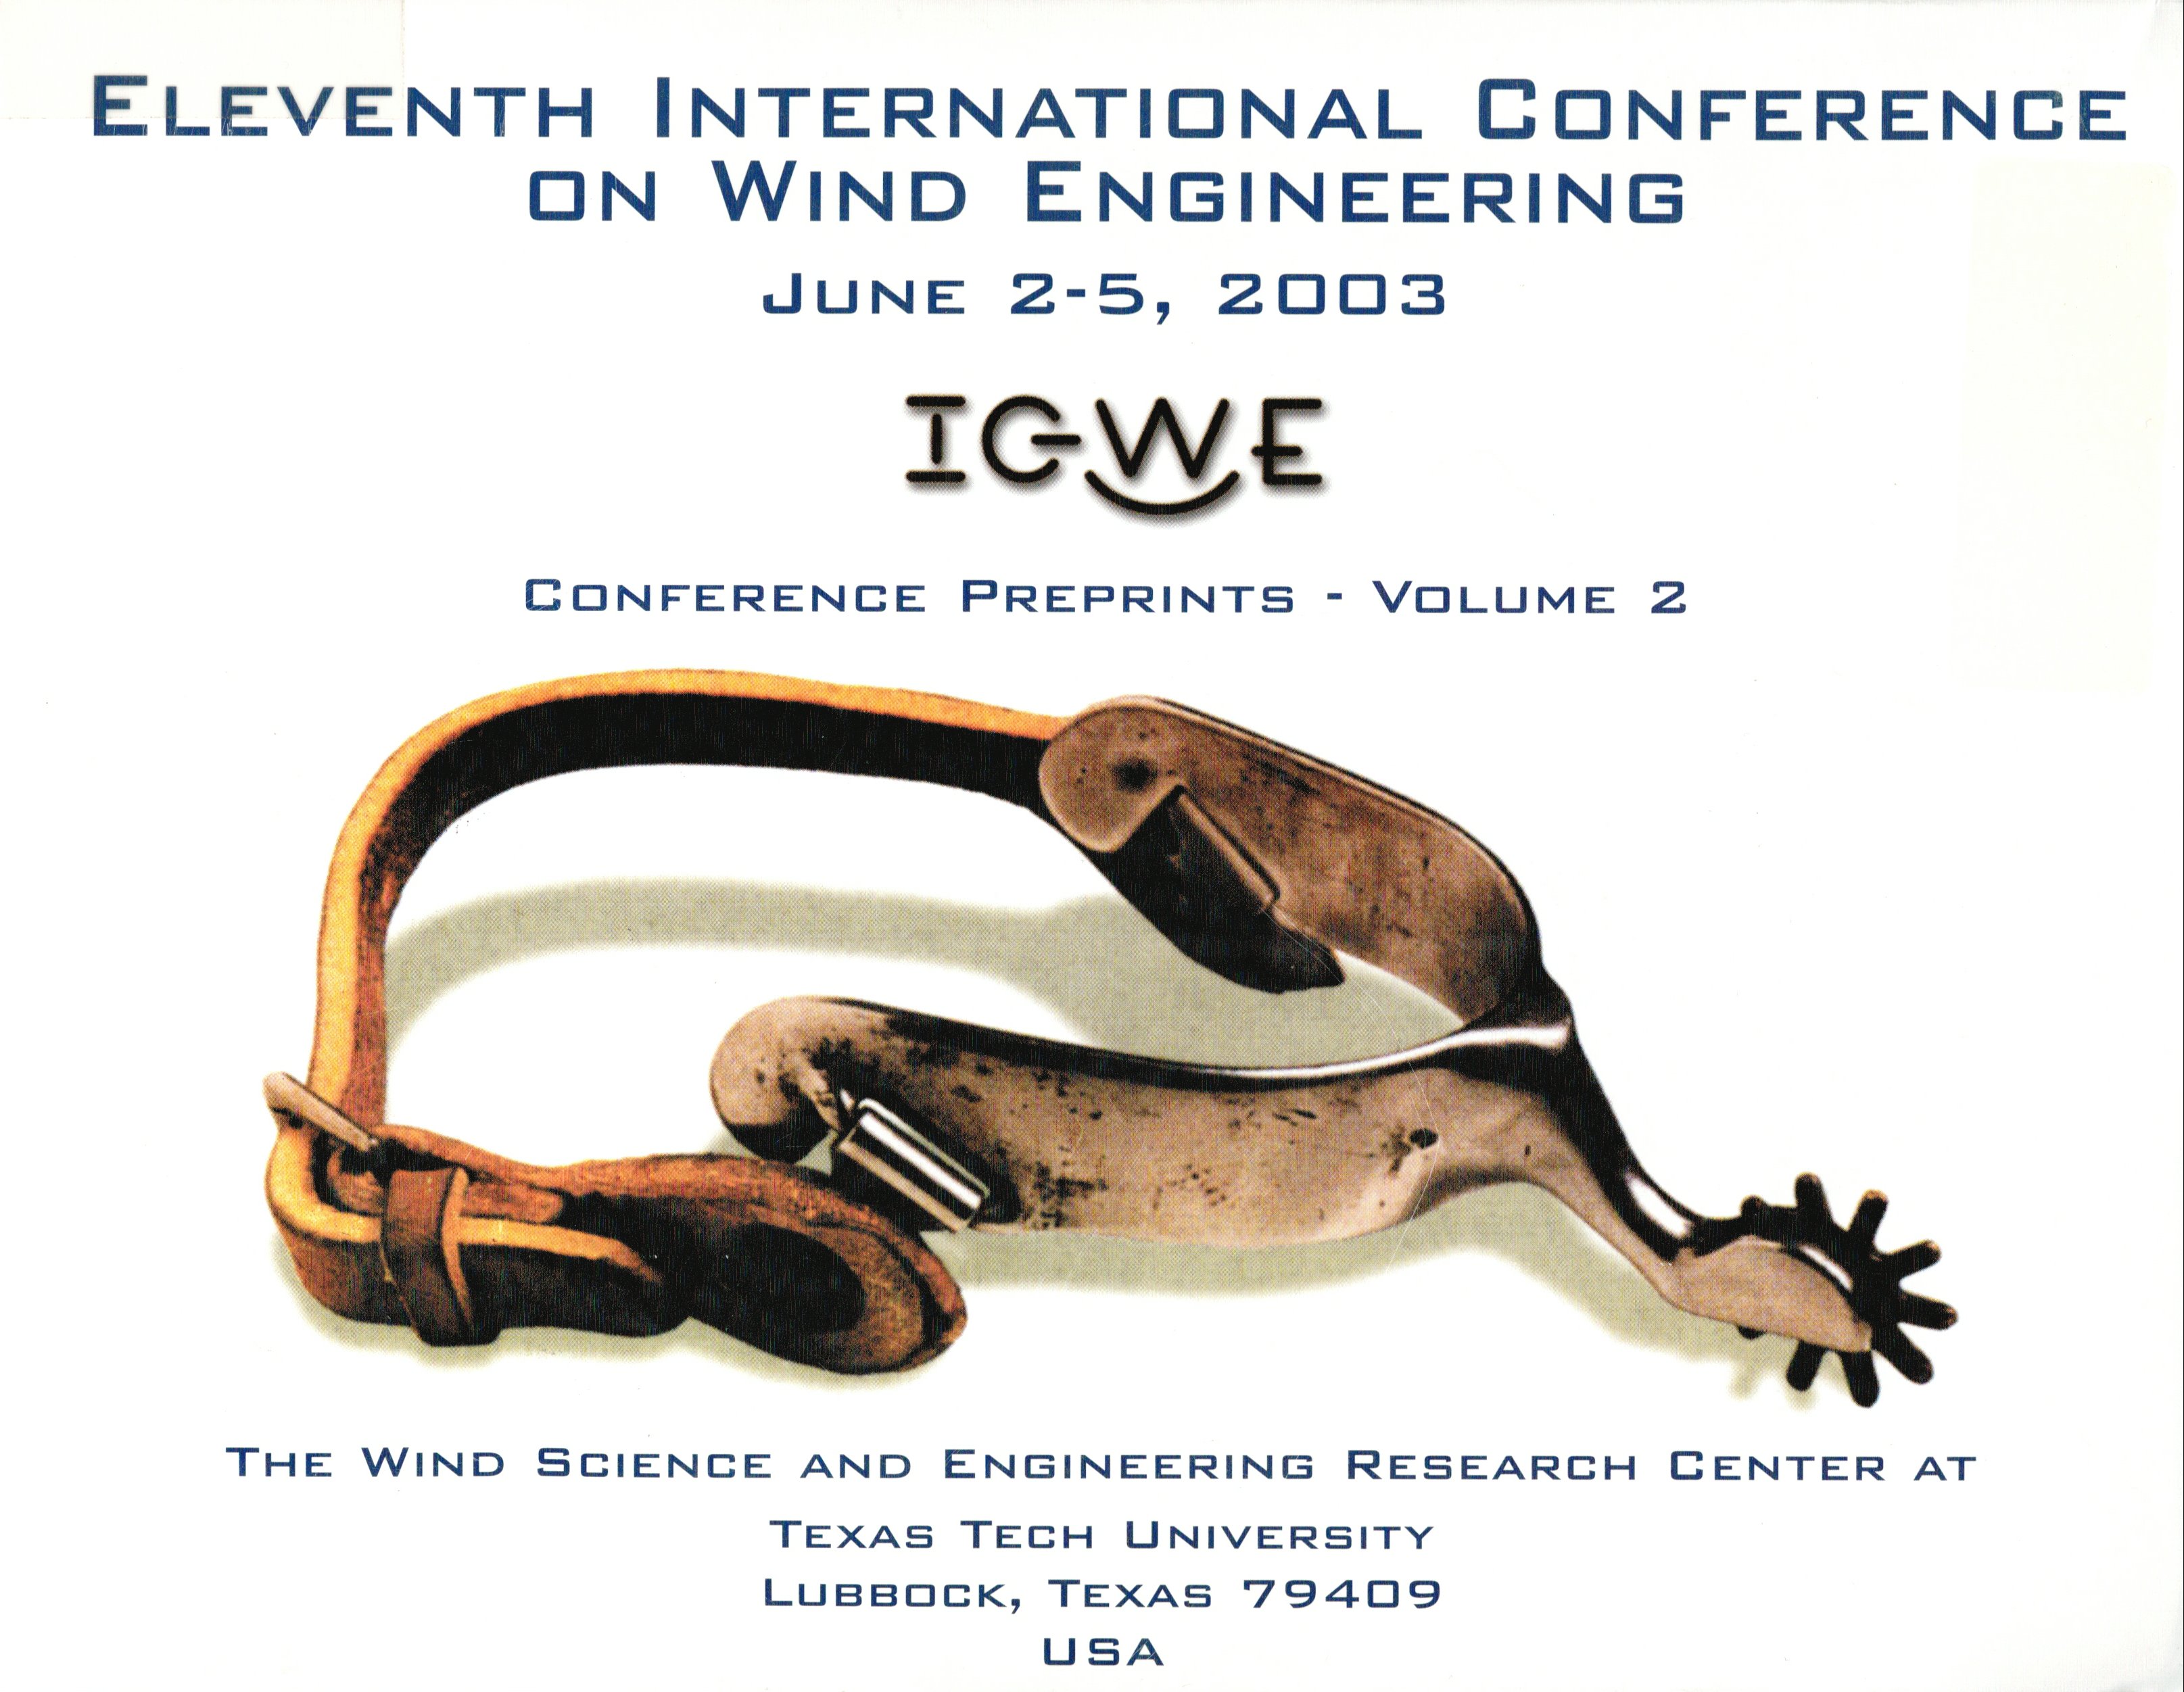 Wind Science and Engineering (wise) host the 11th international Conference on Wind Engineering.  Conference preprints cover states information about the conference.